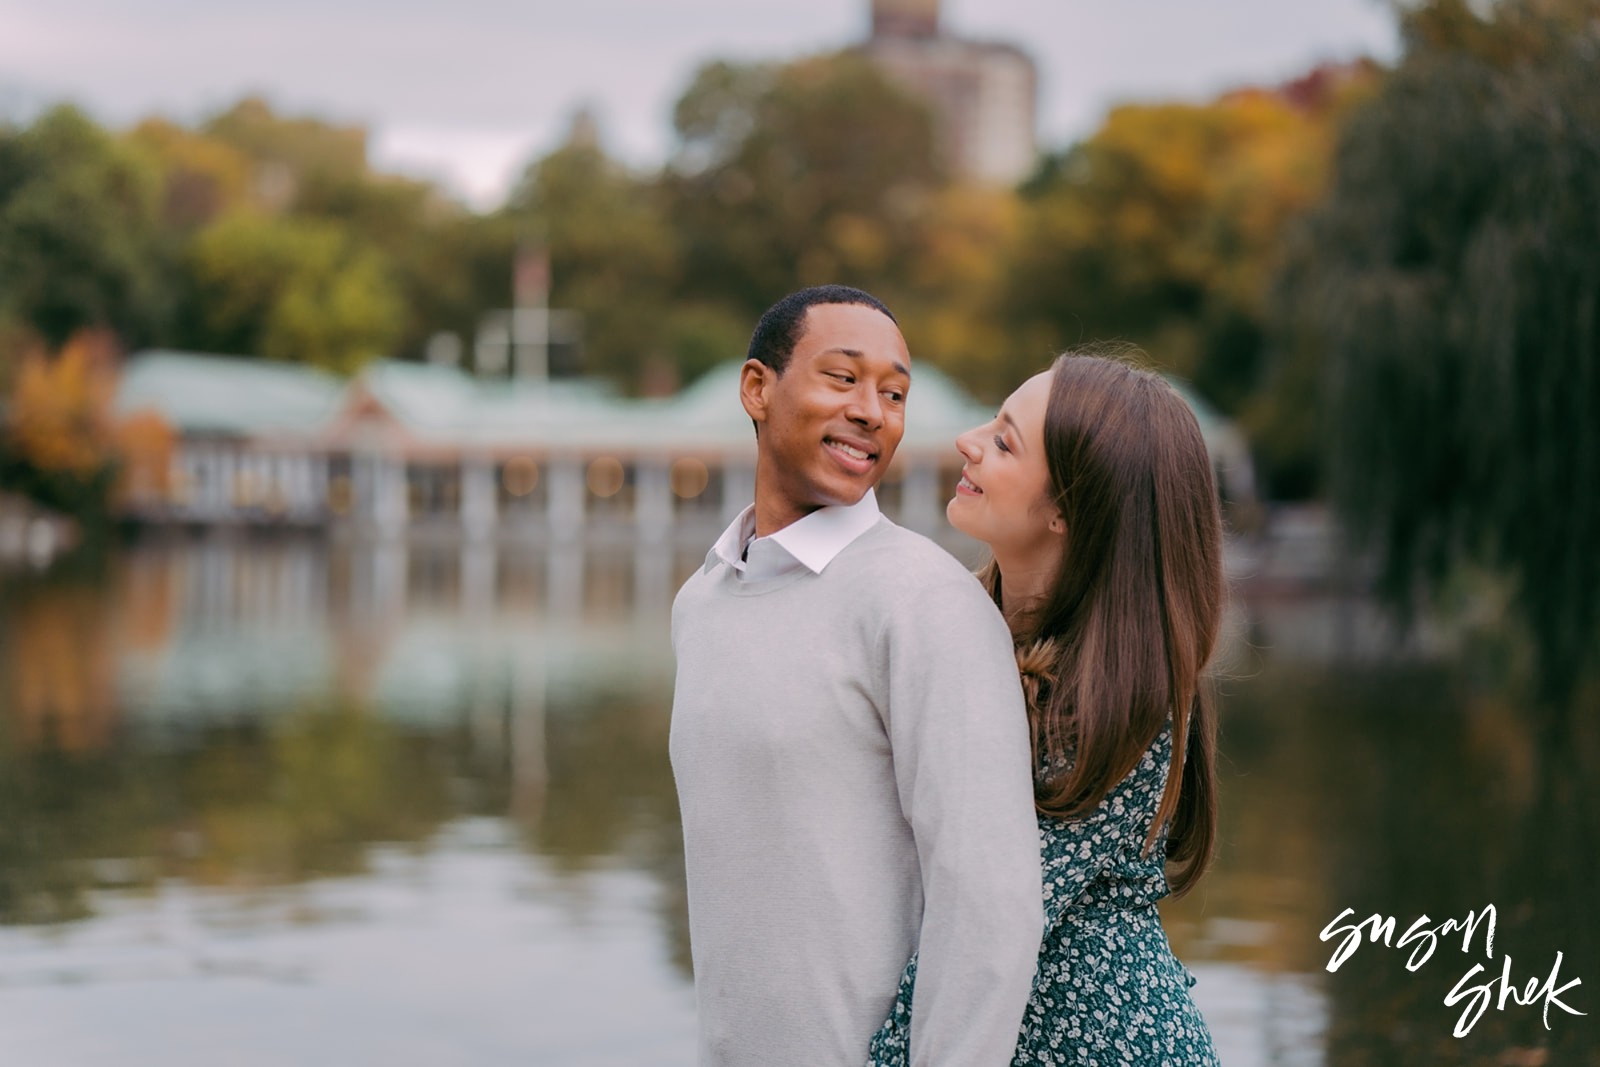 Central Park Boathouse Engagement Session, Engagement Shoot, NYC Engagement Photographer, Engagement Session, Engagement Photography, Engagement Photographer, NYC Wedding Photographer, NYC Engagement Photo Locations